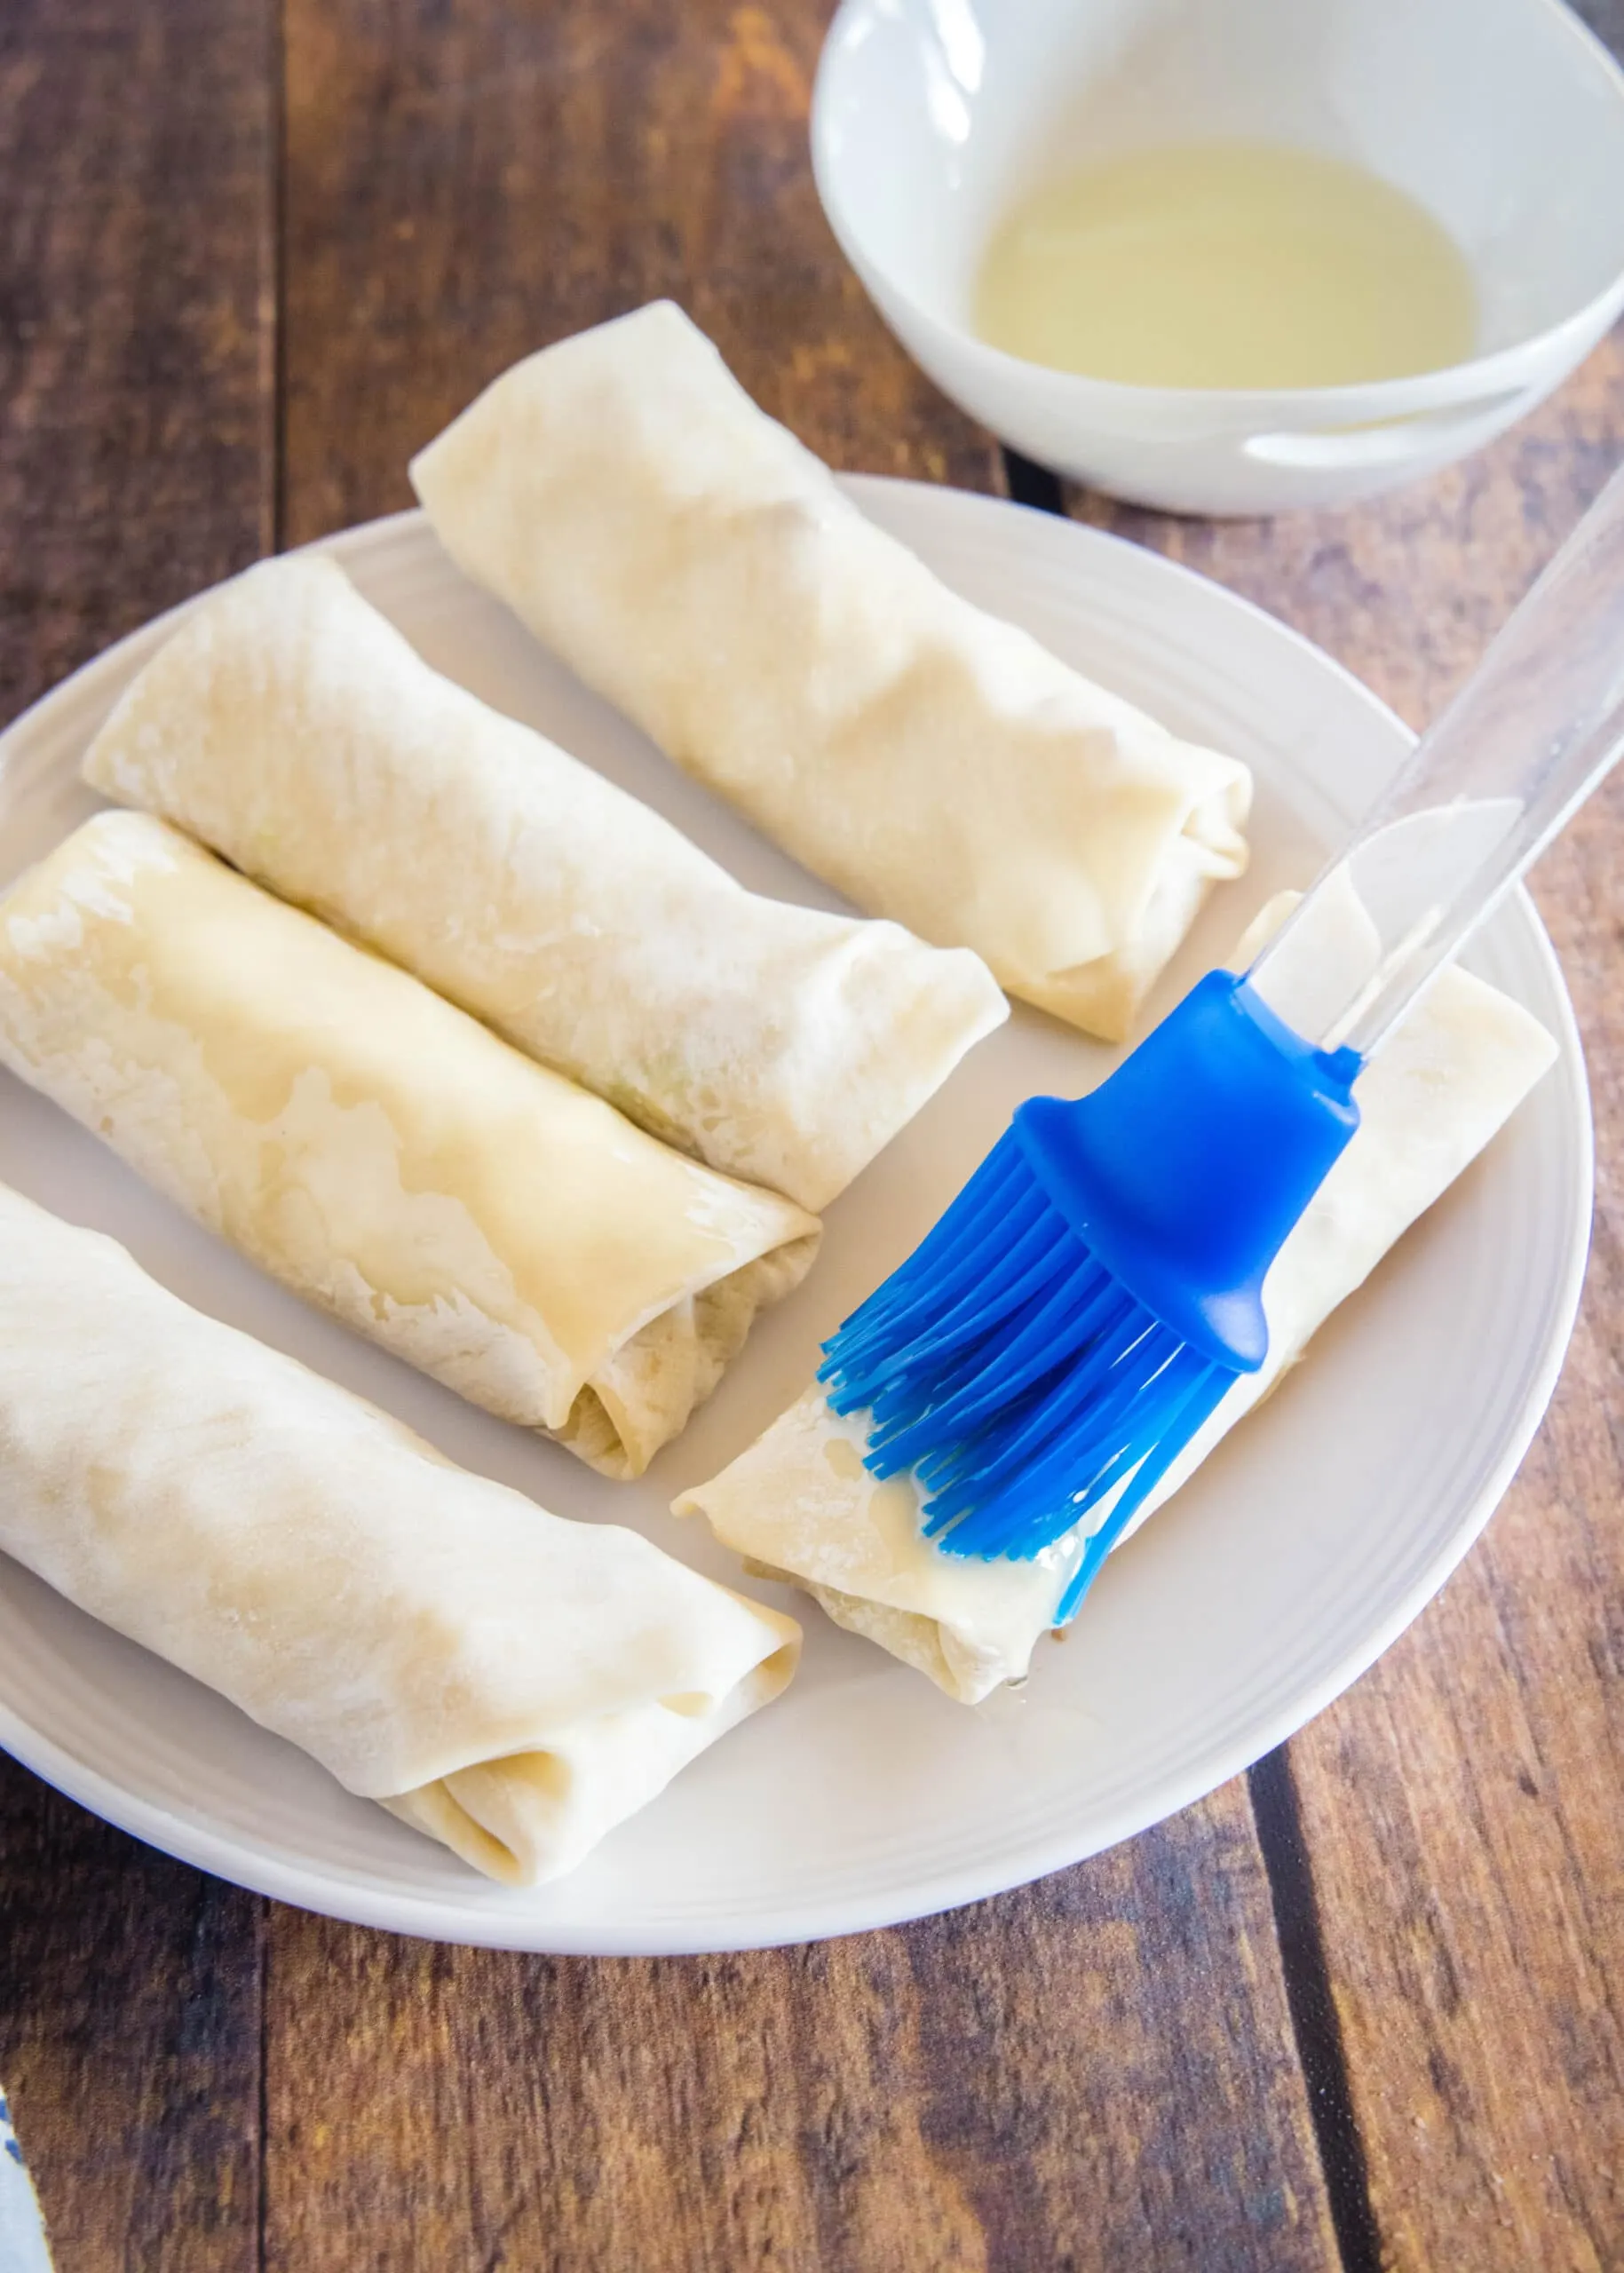 brush egg rolls with oil before putting in the air fryer